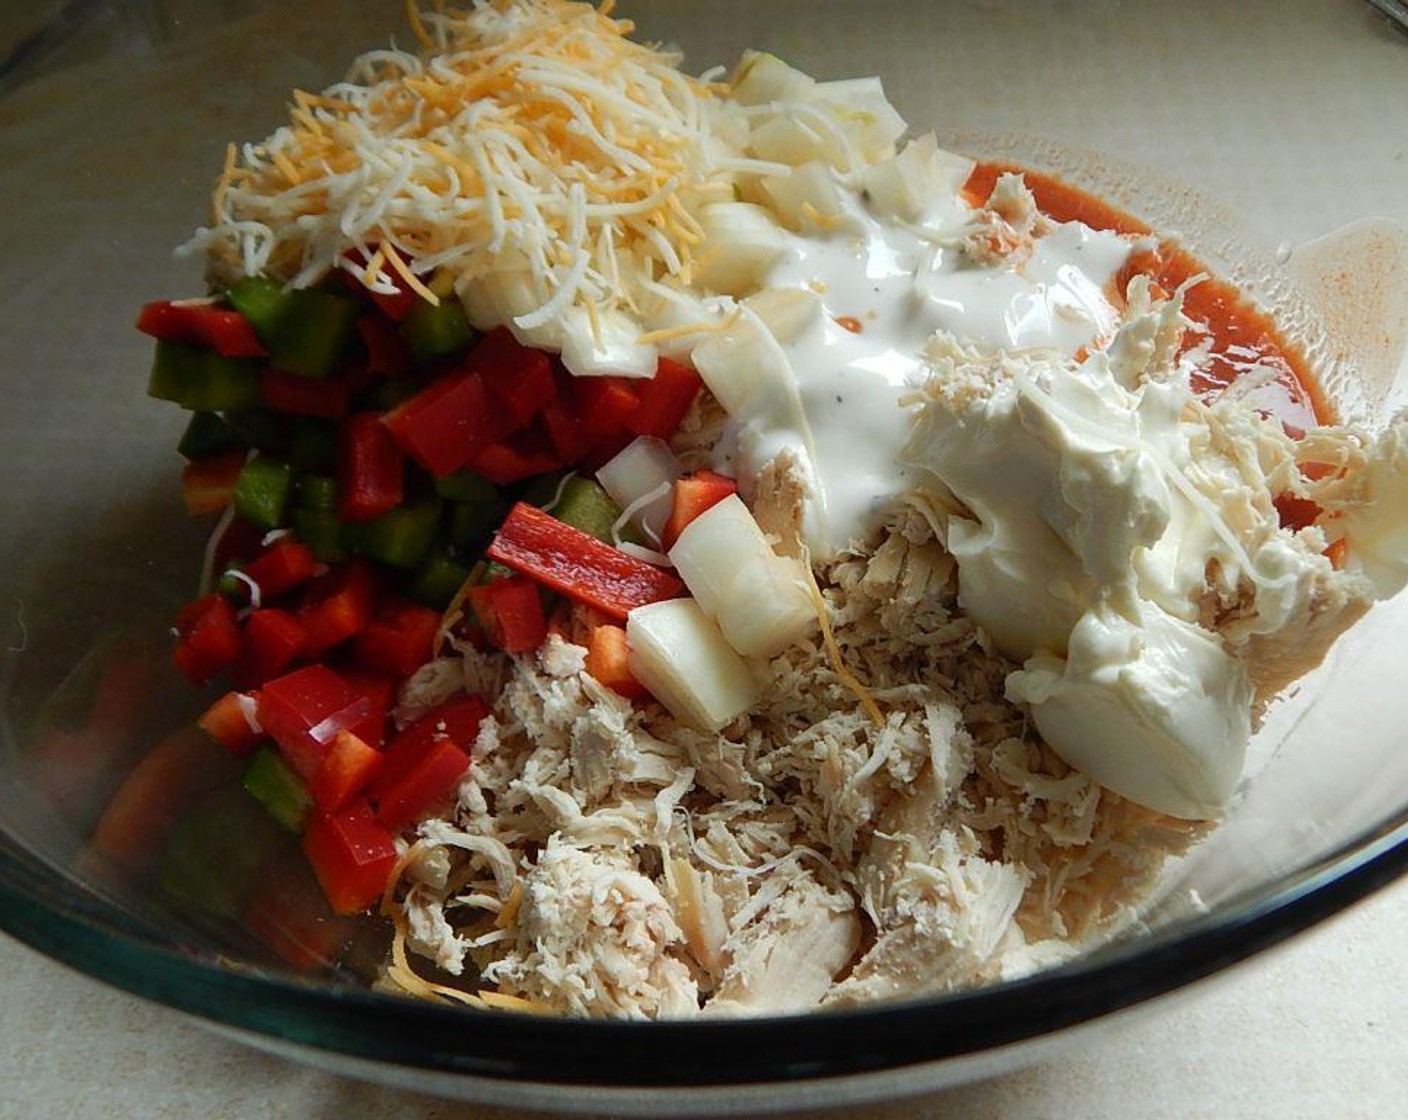 step 4 In a large bowl, mix together Chicken (3 cups), Bell Pepper (1 cup), Onion (3/4 cup), Frank's® RedHot® Sauce (1/4 cup), Fat-Free Ranch Dressing (3 Tbsp), Fat-Free Cream Cheese (1/4 cup), and Light Shredded Cheese Blend (1/3 cup).